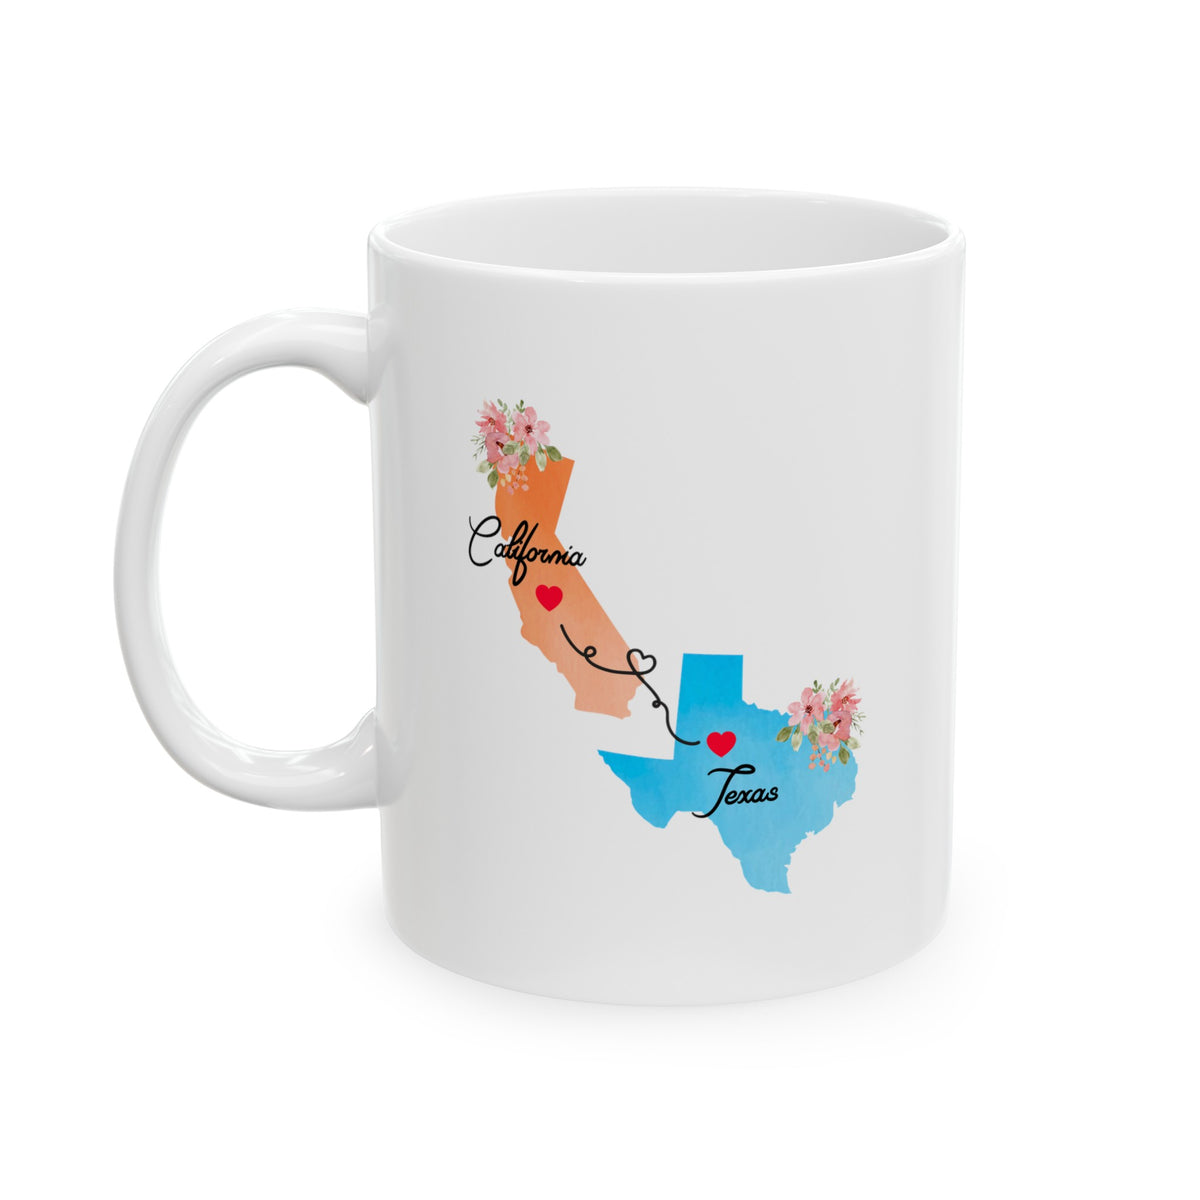 California Texas Gifts - Long Distance State 11 OZ Coffee Mug for Mom and Dad